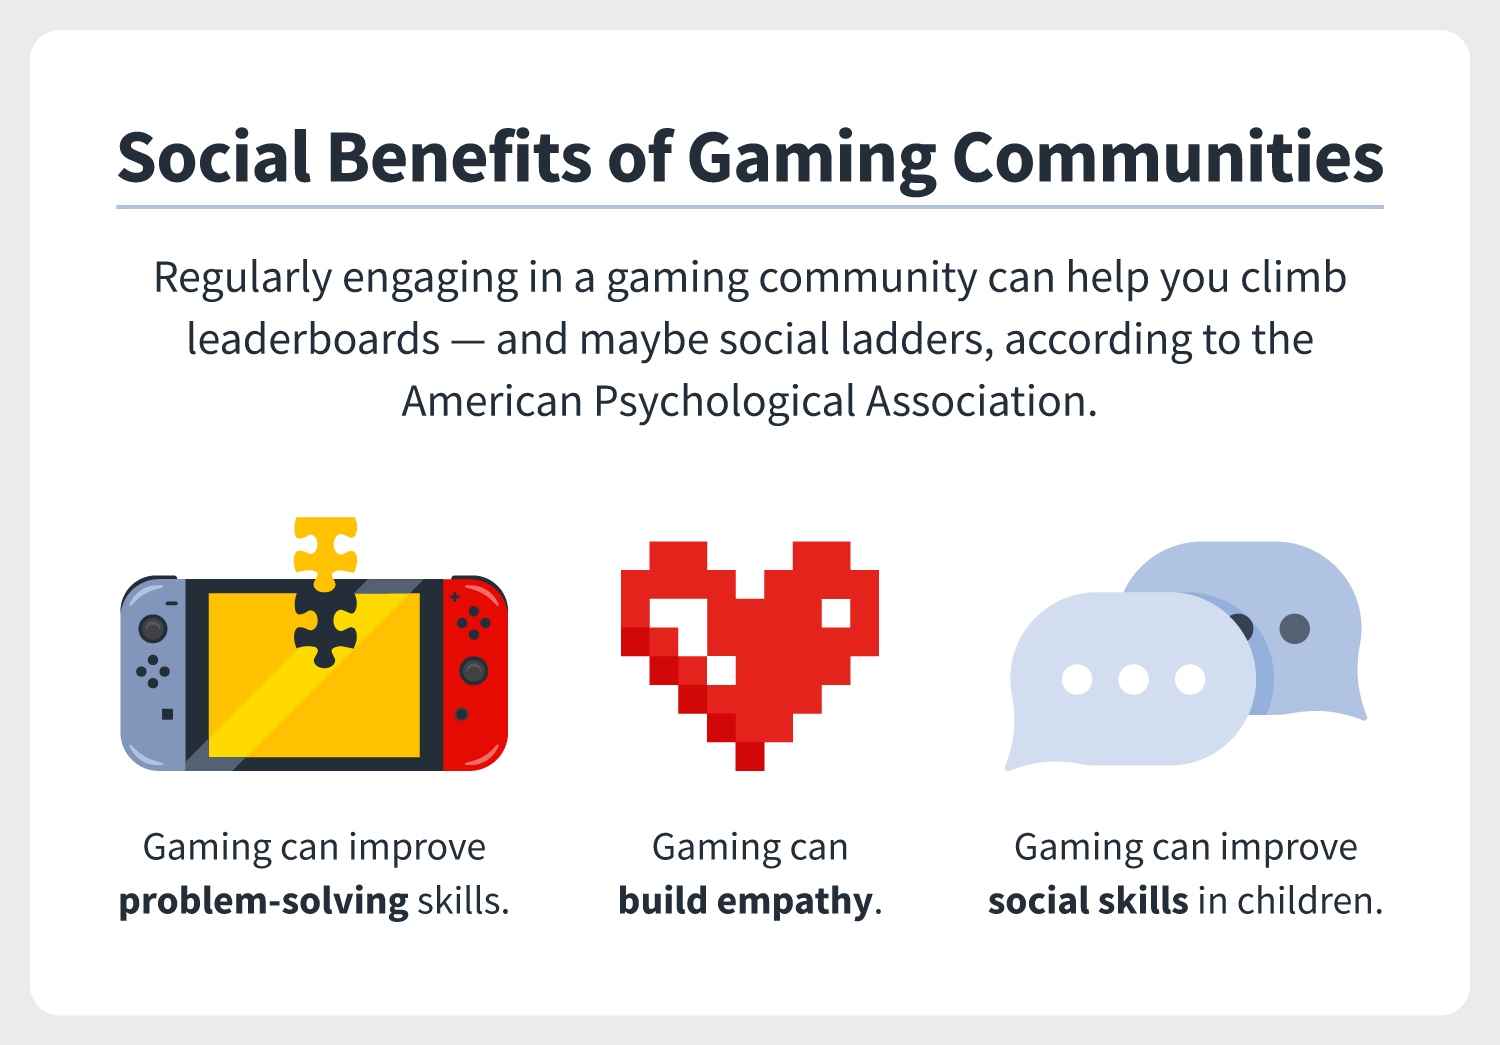 a puzzle piece, a heart, and thought bubbles allude to the social benefits of gaming and engaging with gaming communities, including that gaming can improve problem-solving skills, build empathy, and improve social skills